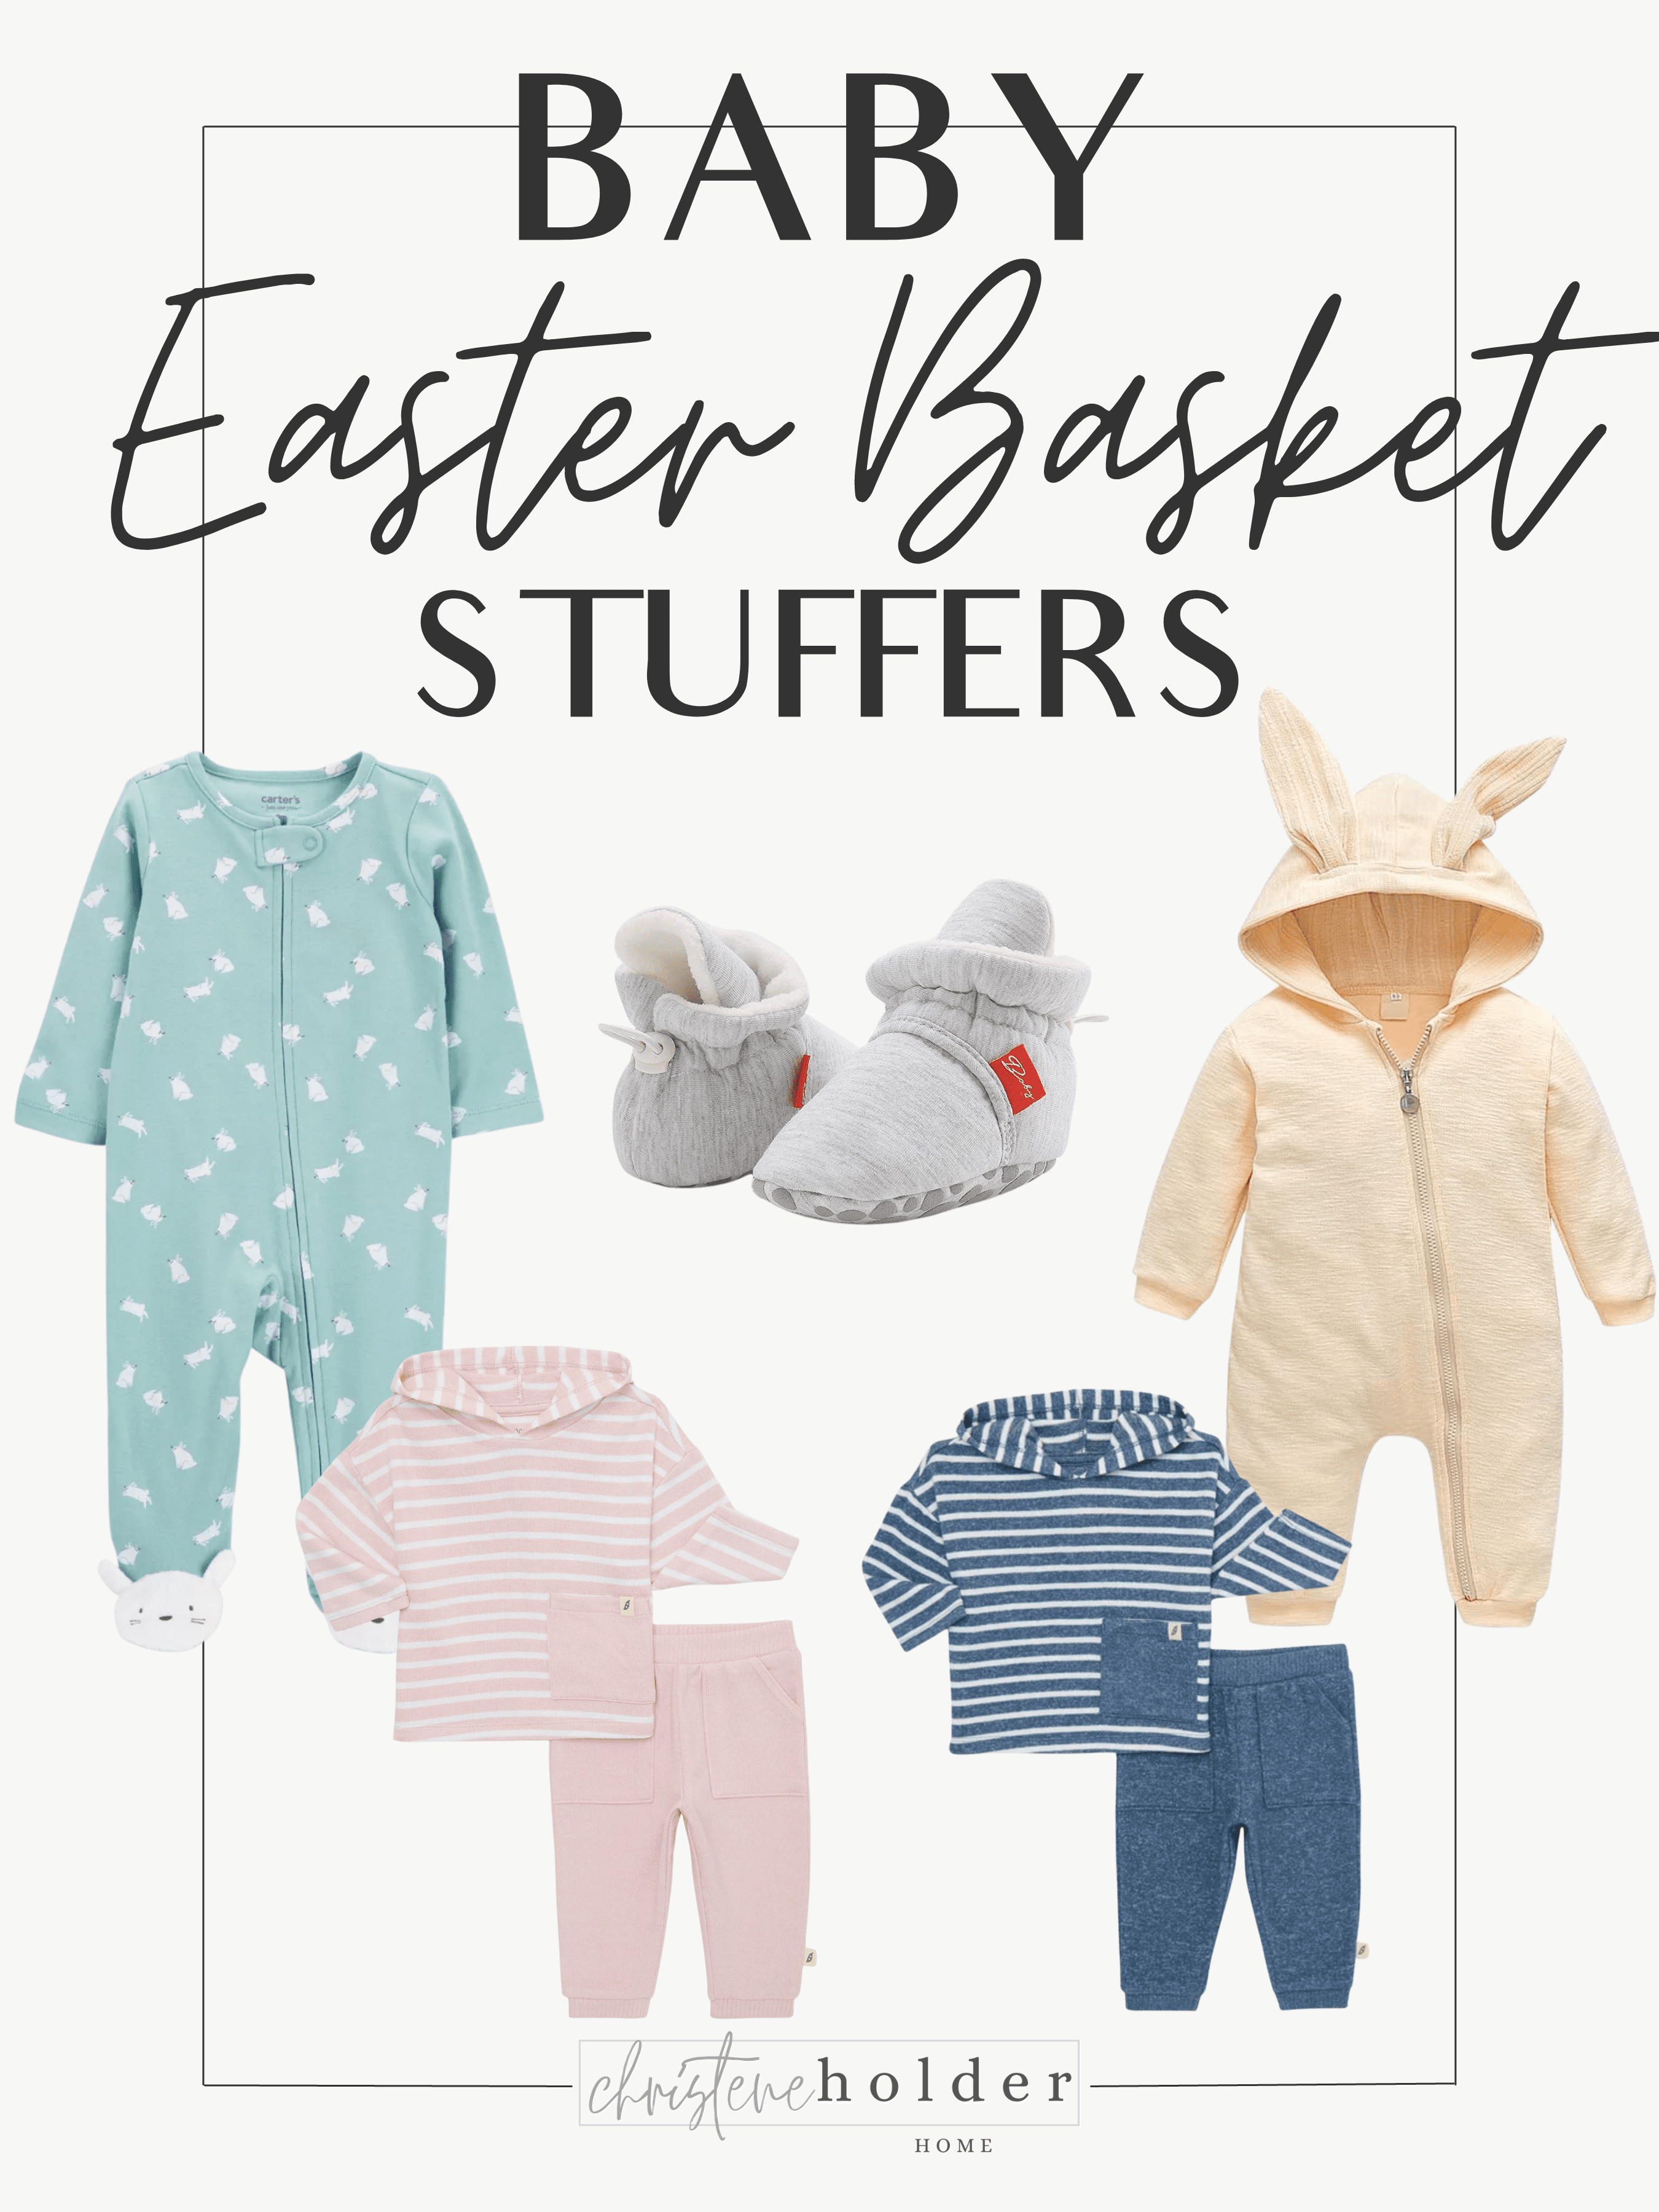 Baby Easter basket clothes and accessories